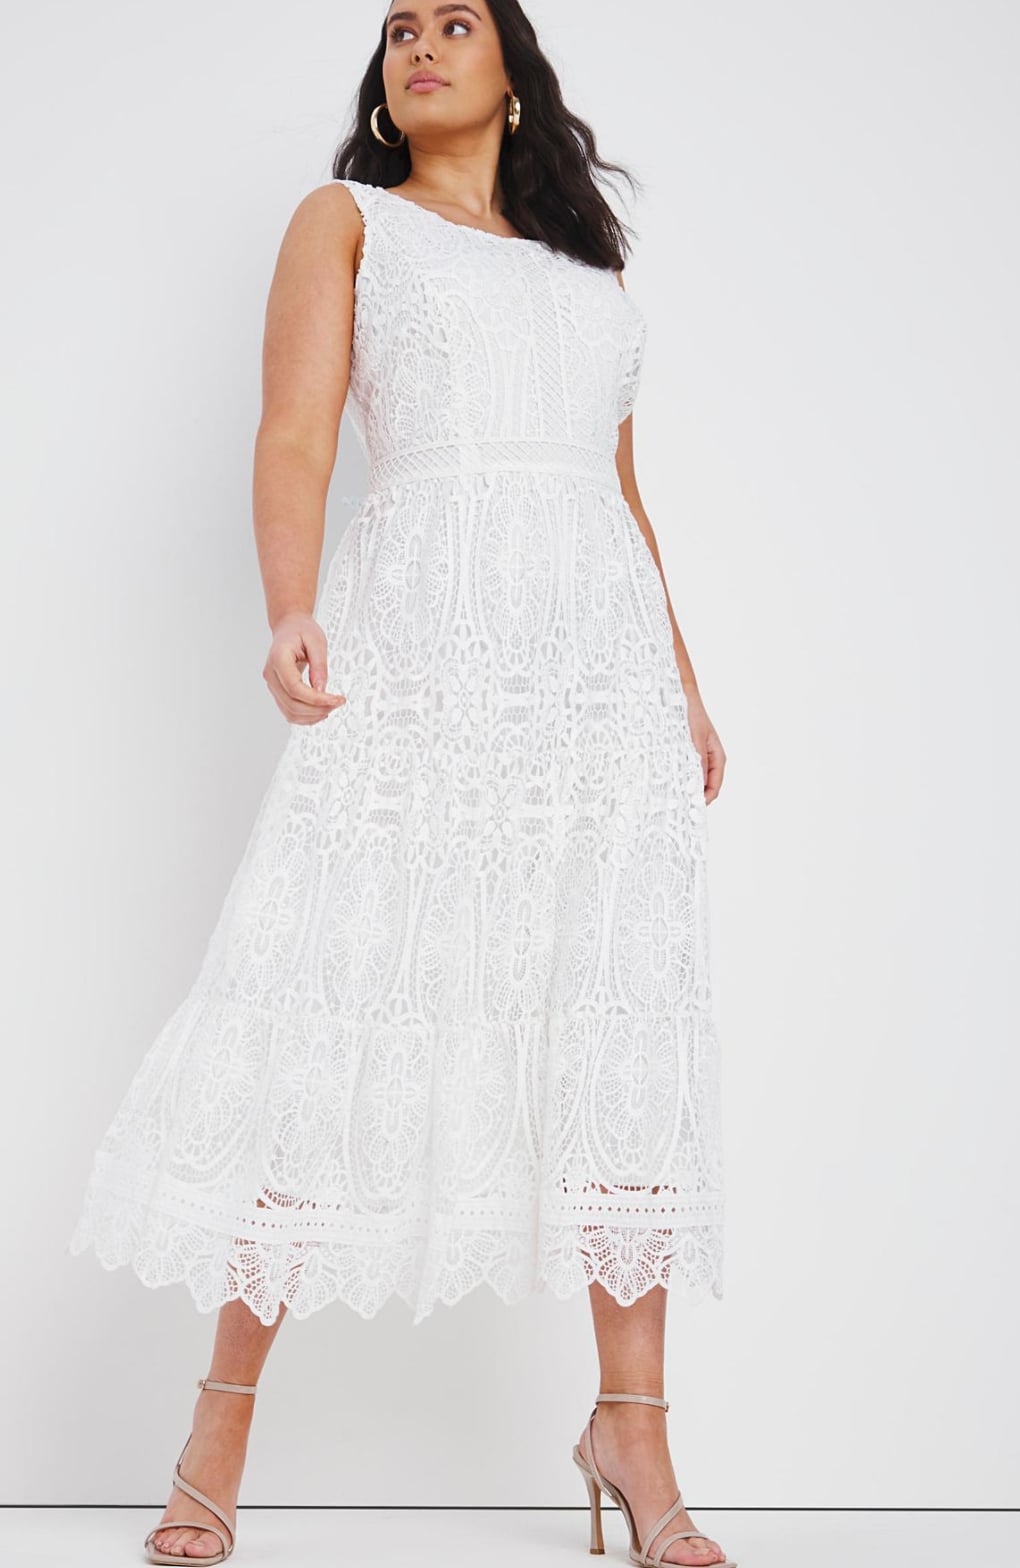 Simplybe Joanna Hope Linear Lace Prom Dress